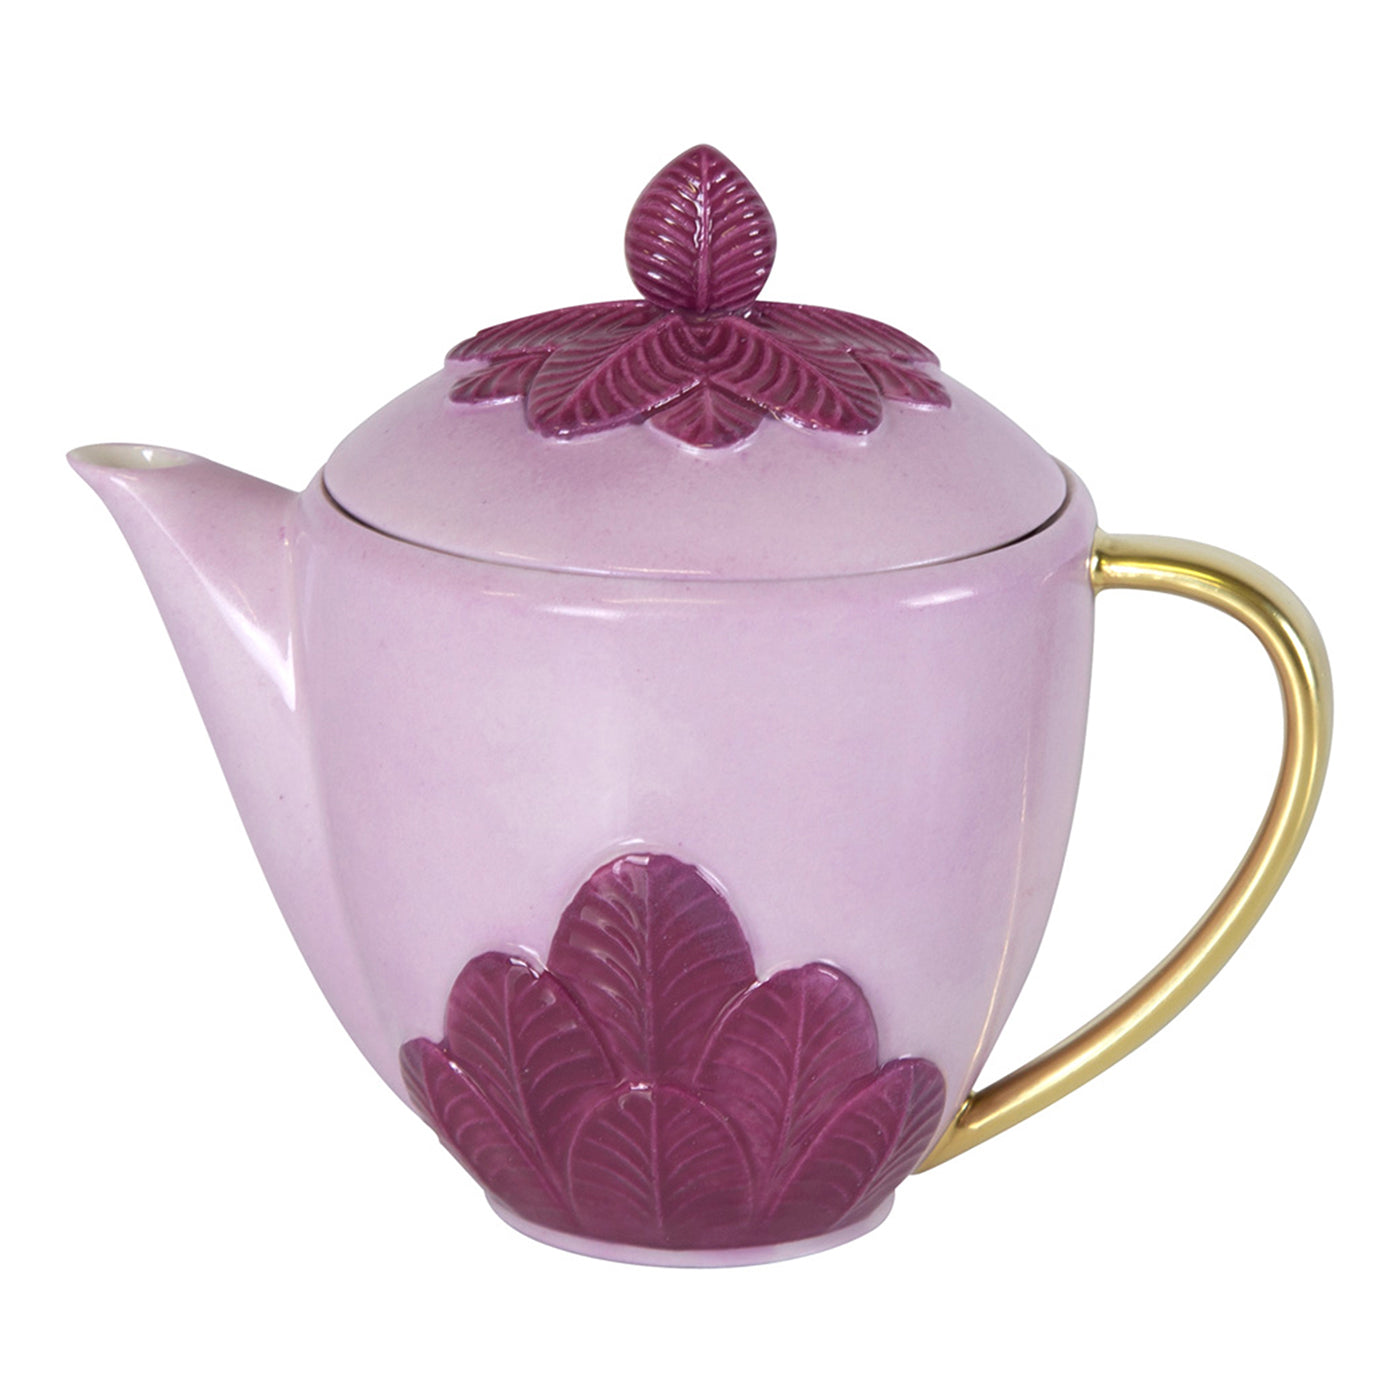 PEACOCK CREAMER - PURPLE AND GOLD - Main view